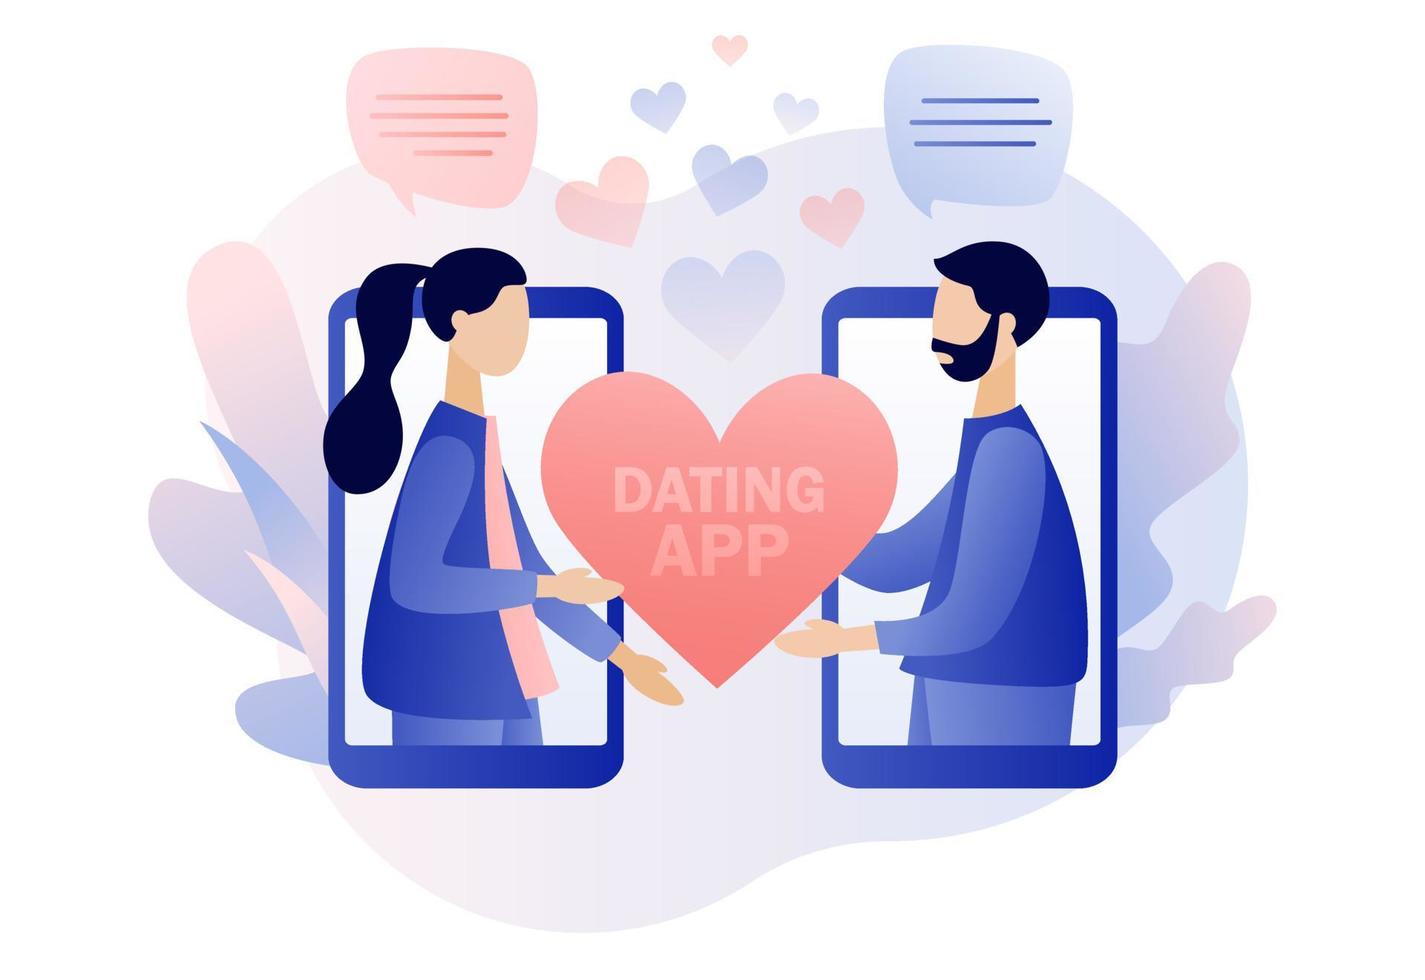 Online dating. Tiny people chatting in the dating app. Virtual relationship and online love. Acquaintance in social network. Modern flat cartoon style. Vector illustration on white background